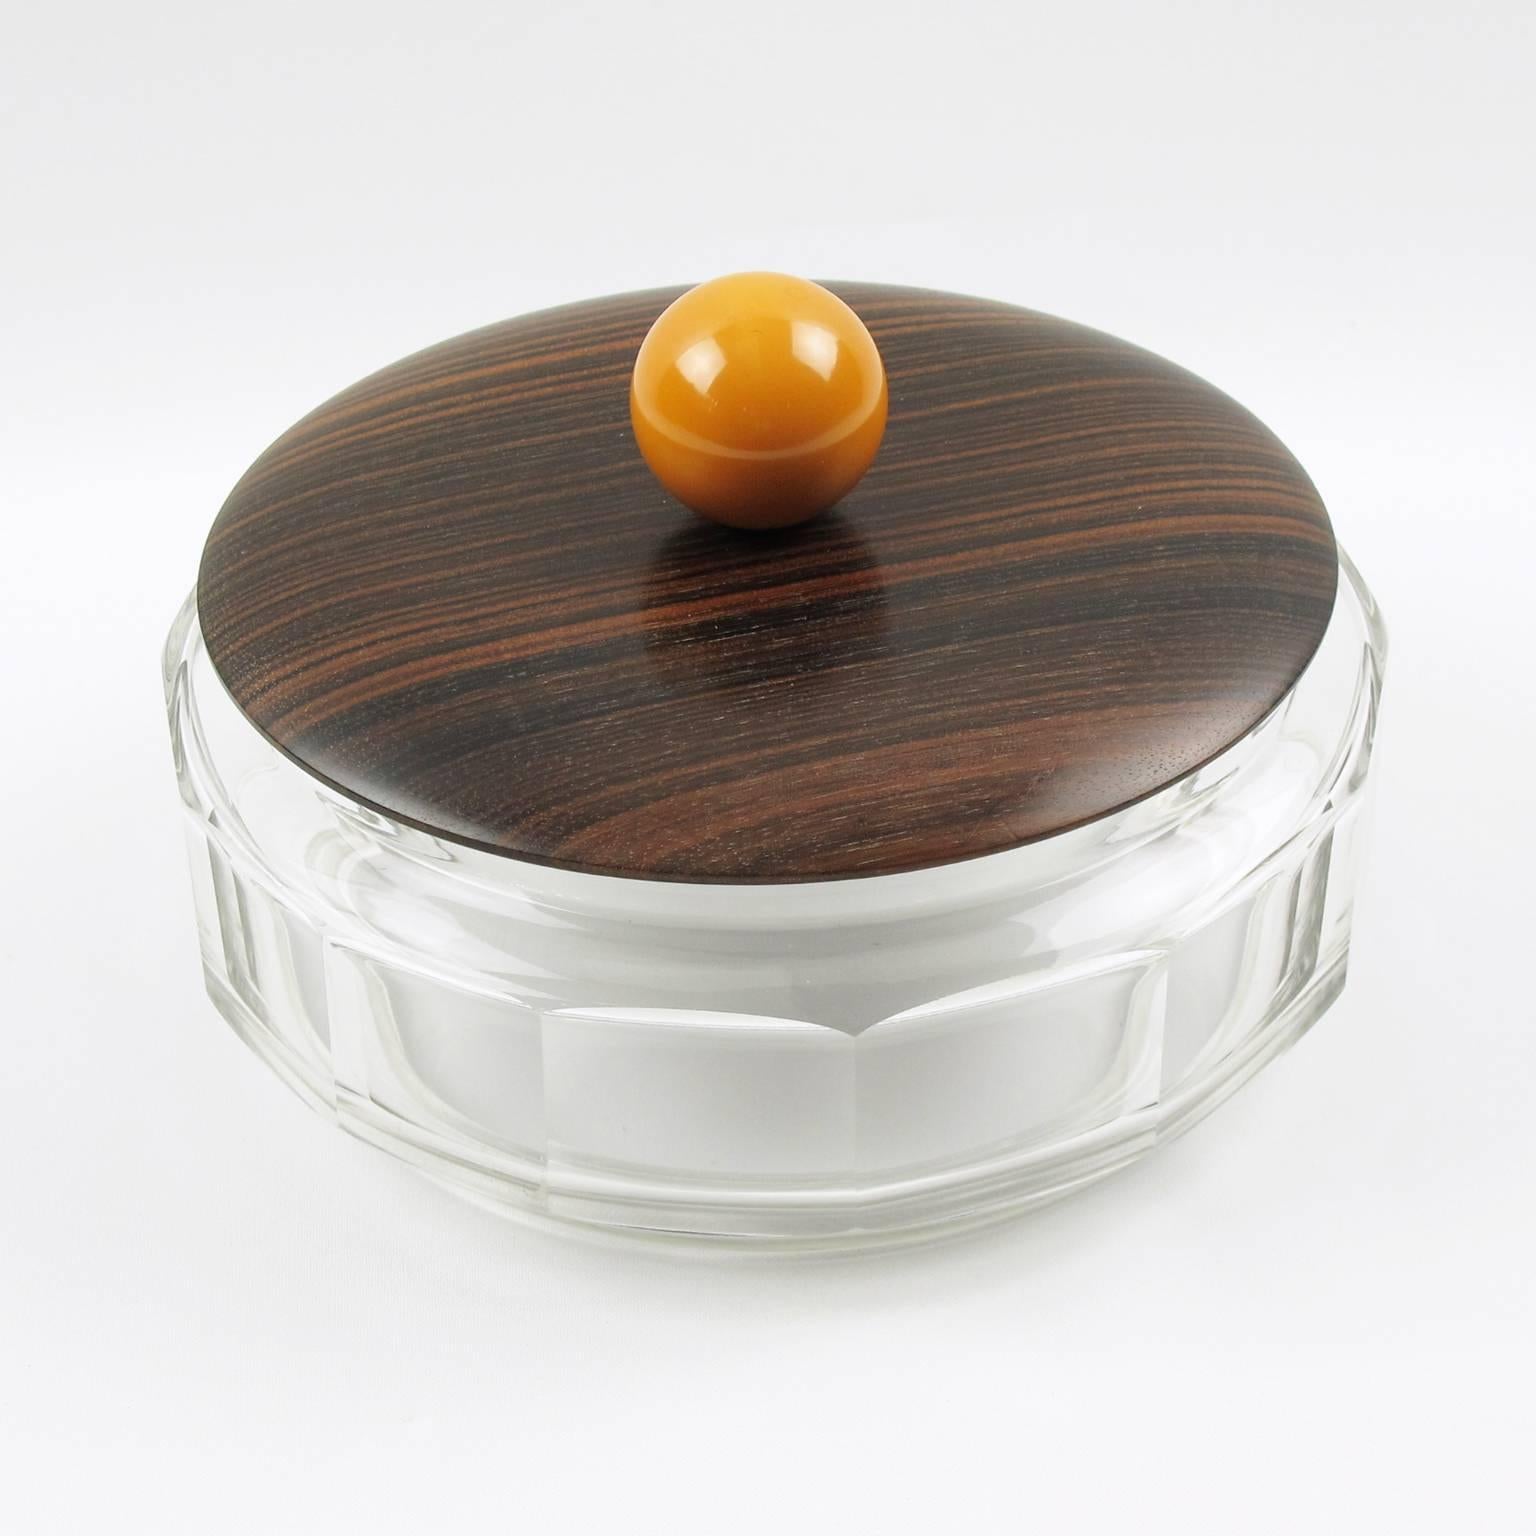 Elegant vintage French Art Deco decorative cookie box, candy jar, circa 1930s. Modernist round design with large dimensions. Crystal cut bowl with large geometric etching all around, topped with Macassar Ebony wood lib ornate with large round bead